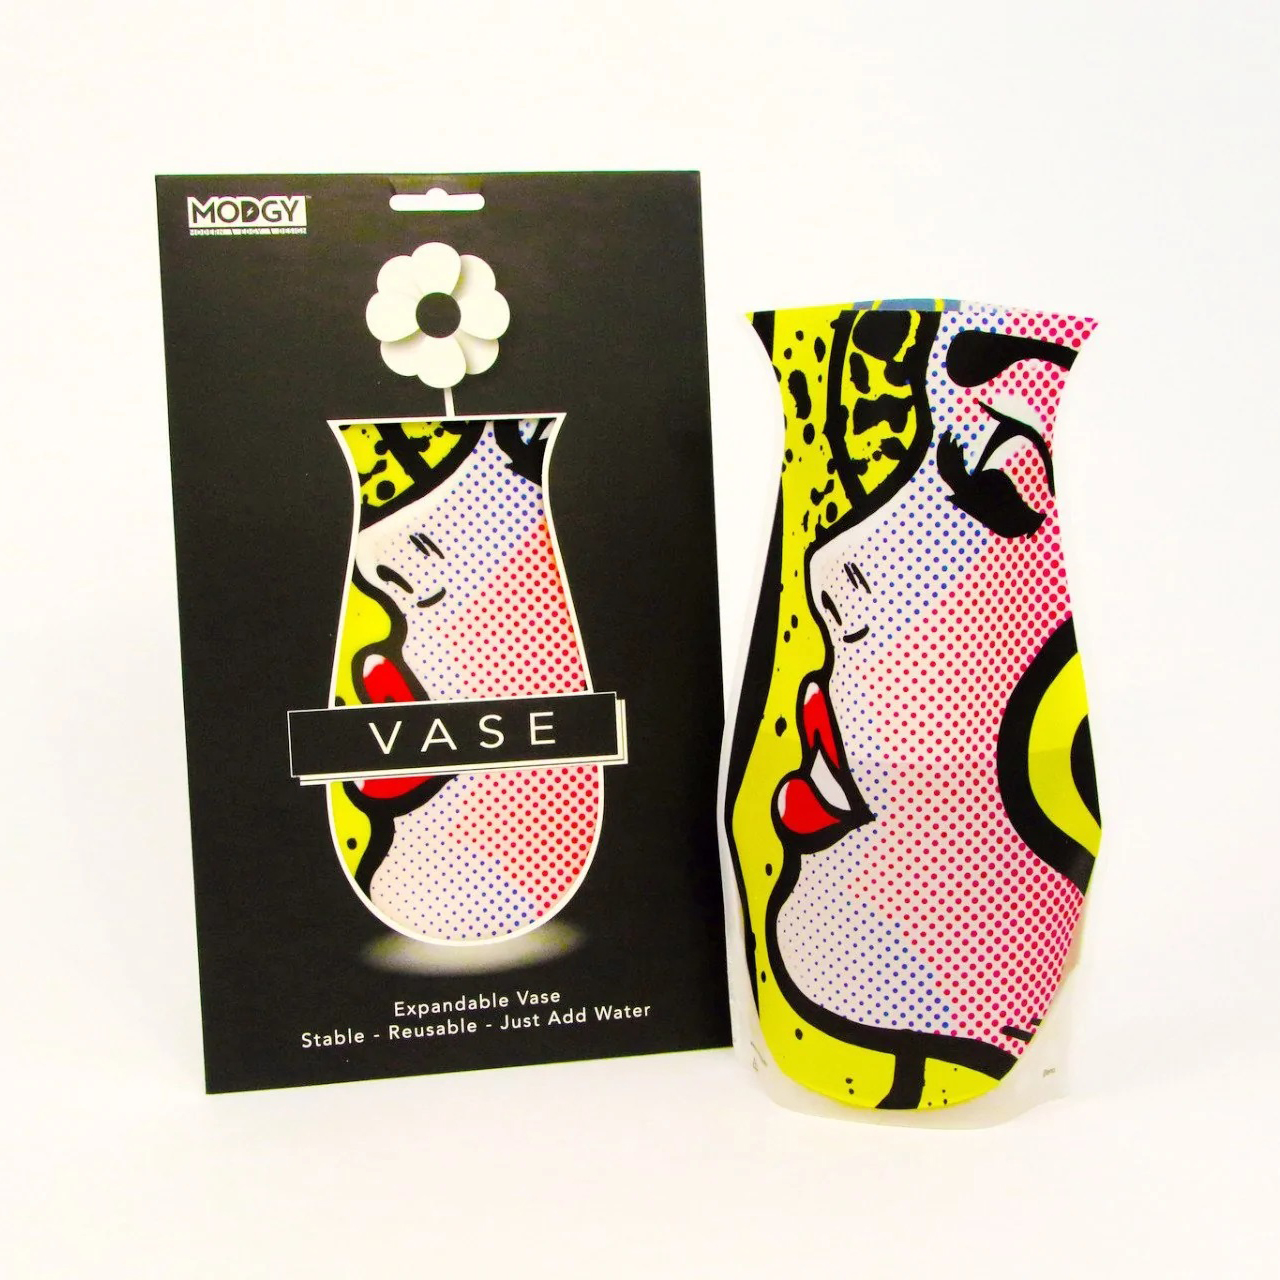 Pop-Art Modern Vase that Collapses For Storage | Great Gift Idea